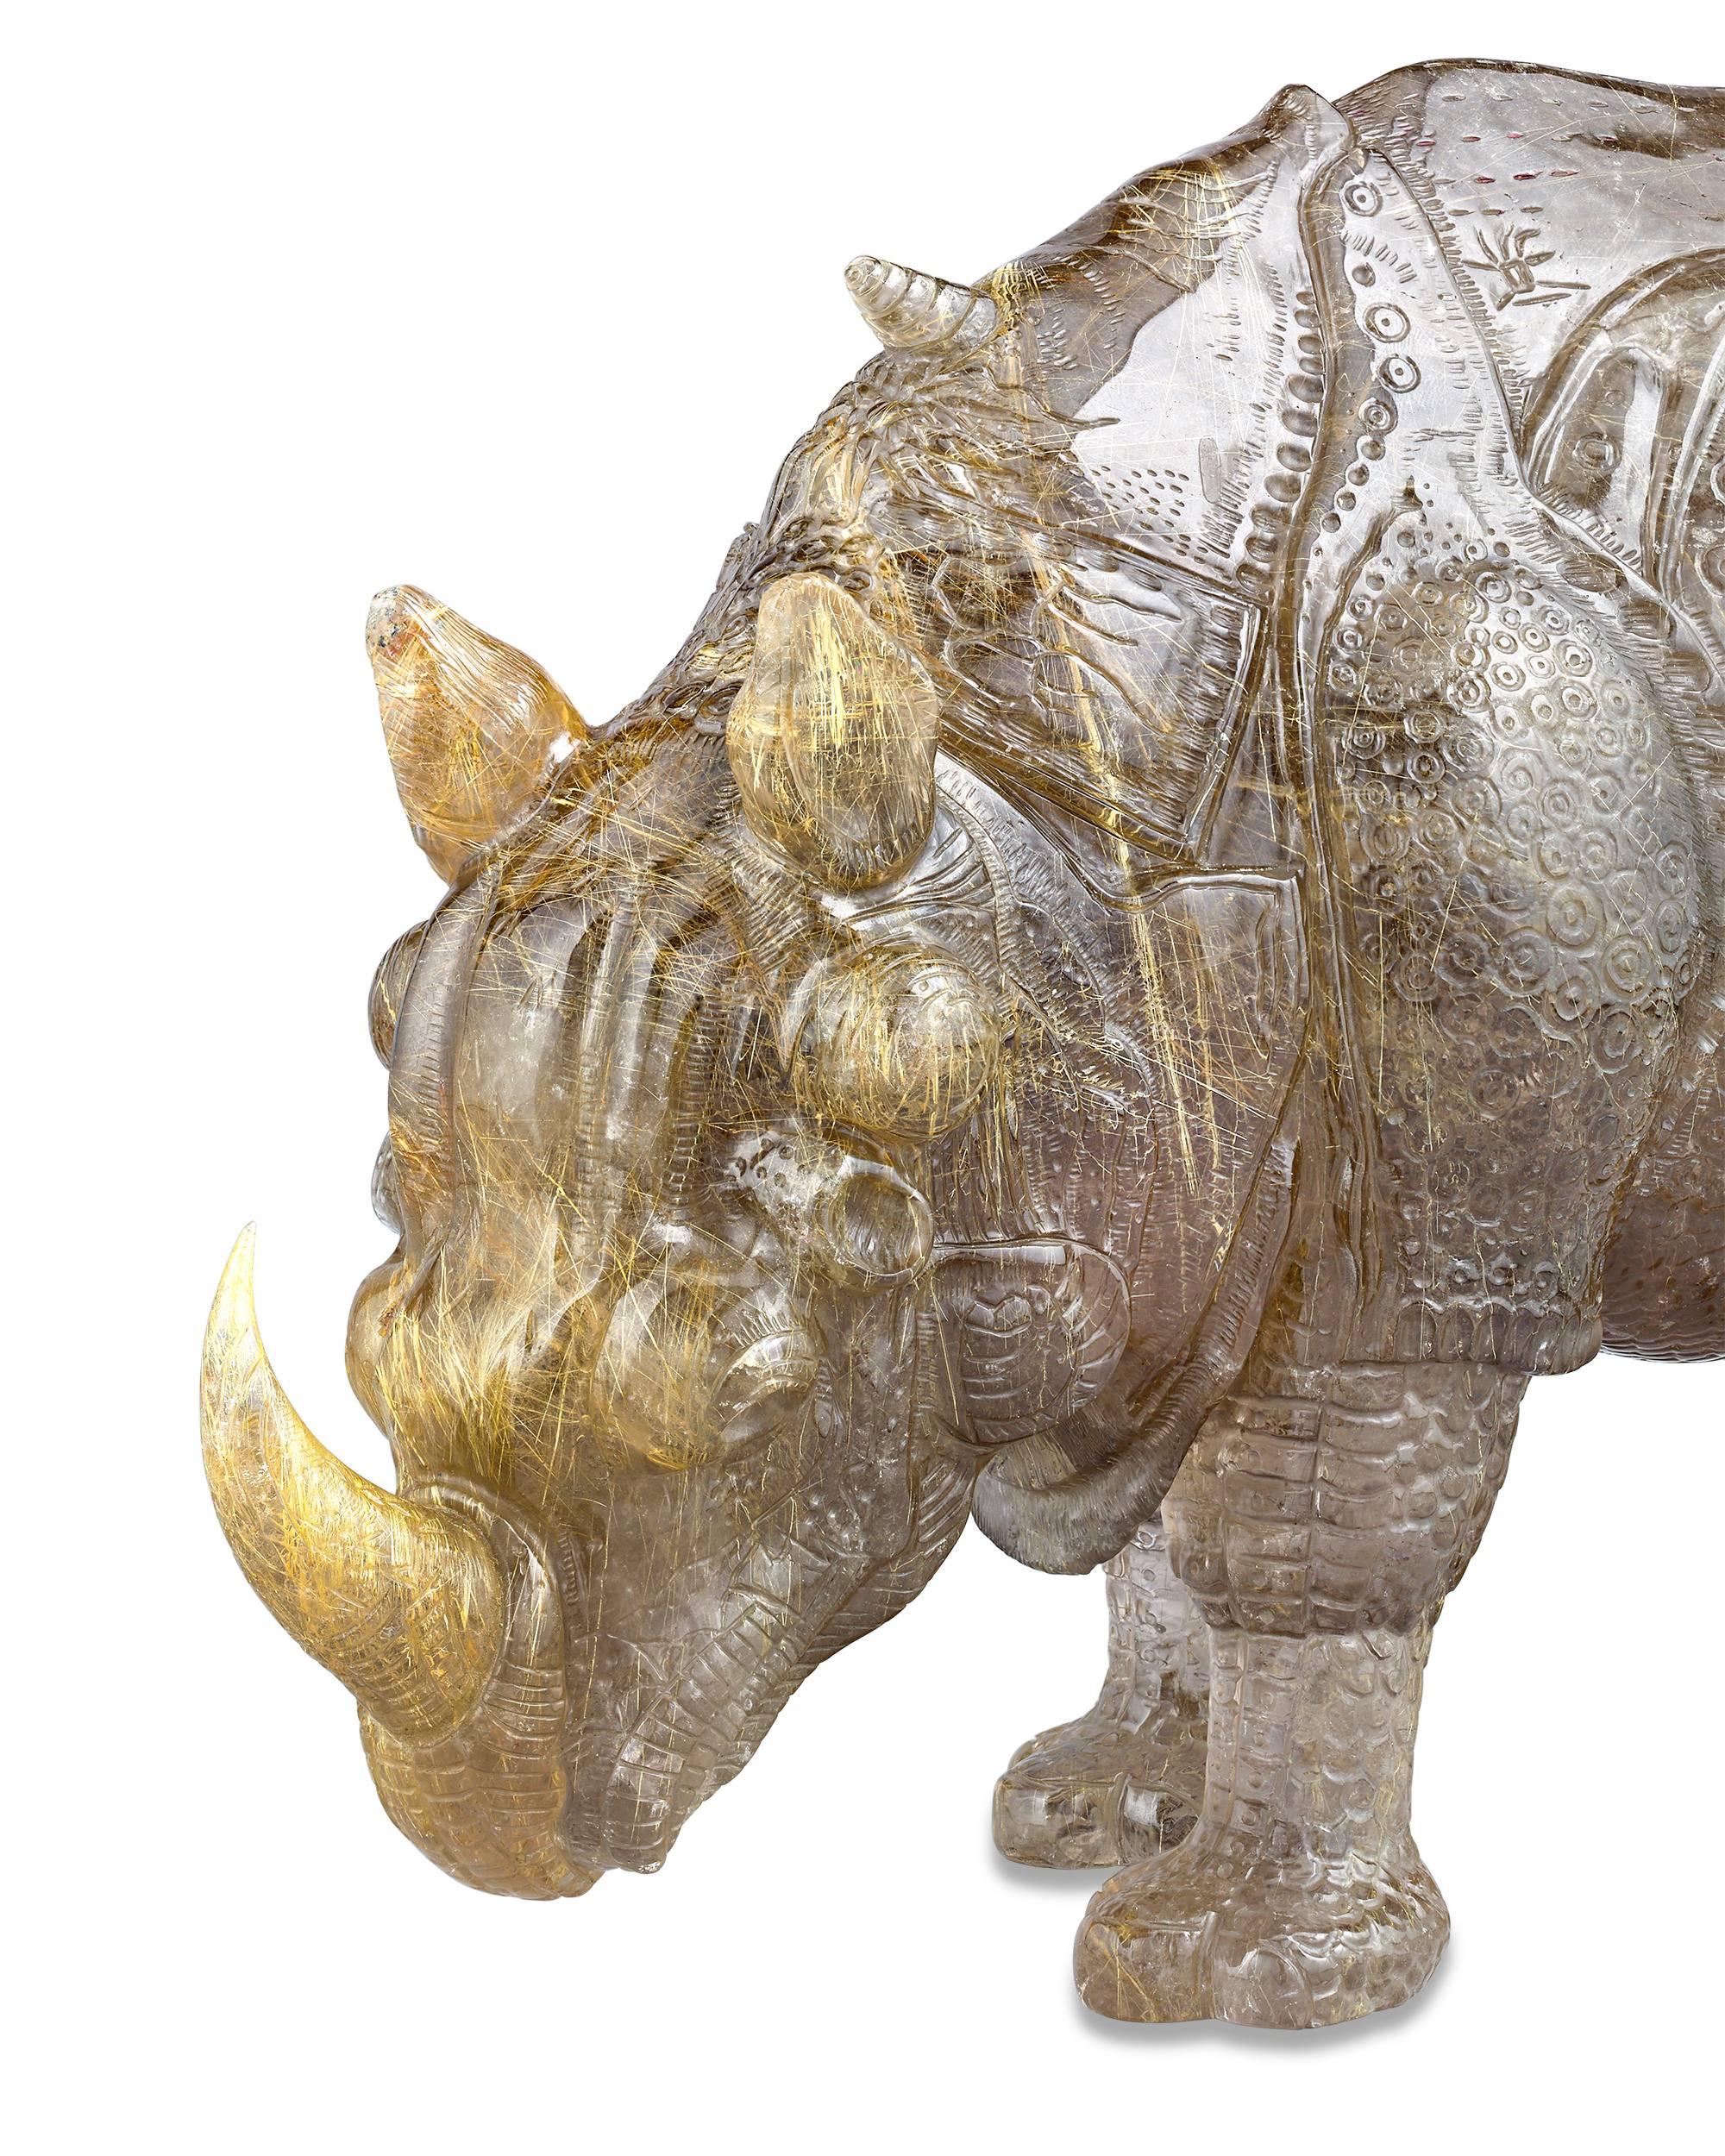 This solid piece of highly translucent rutilated quartz has been beautifully carved to depict a fantastical rhinoceros. The objet d’art was crafted by the famed jeweler and sculptor Andreas von Zadora-Gerlof, a man commonly regarded as America's